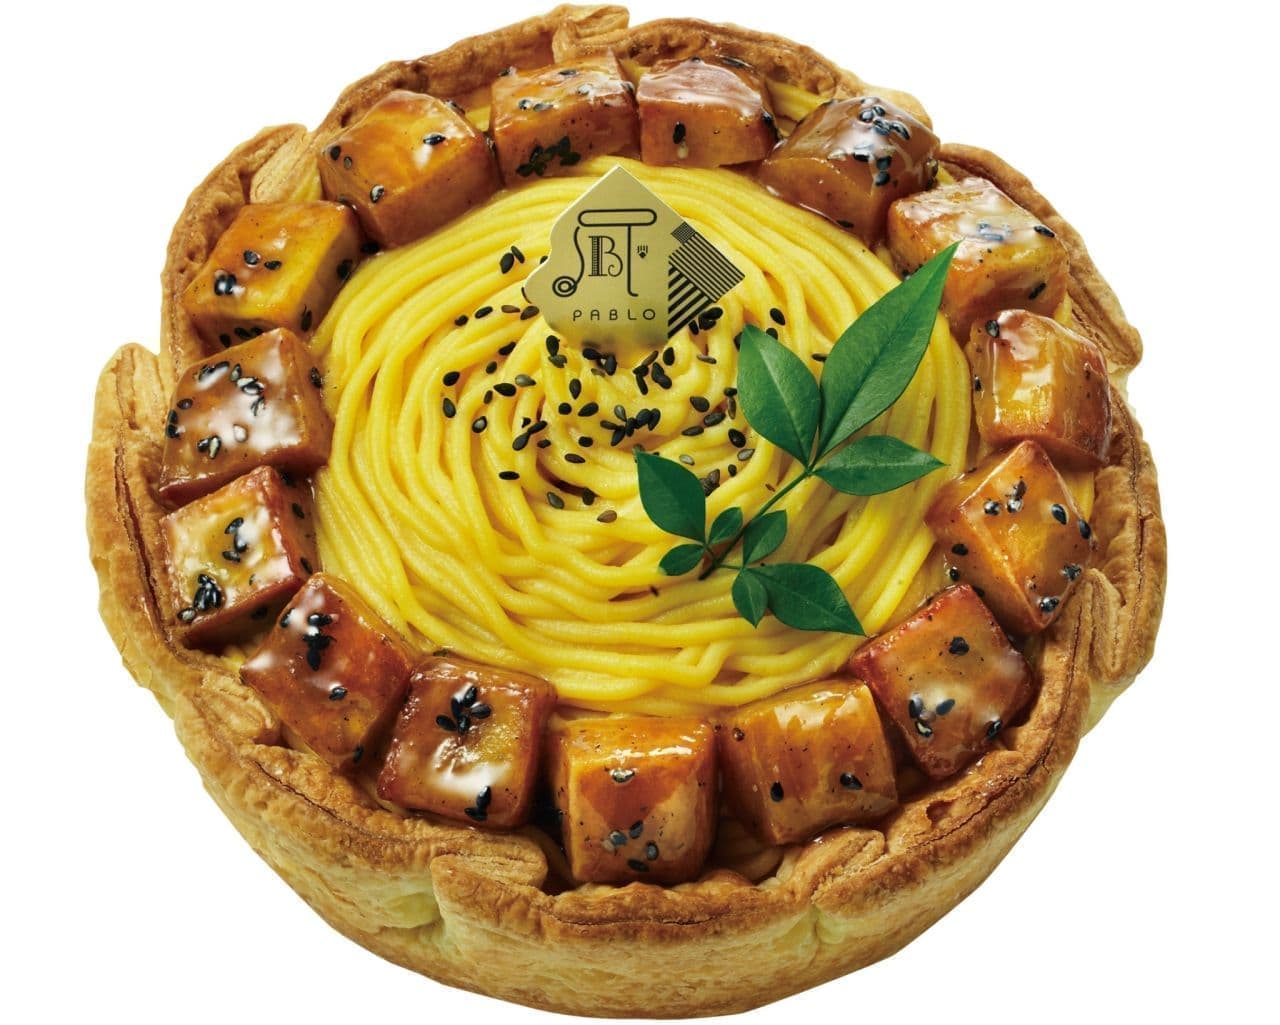 "Anno potato and Earl Gray cheese tart" to Pablo